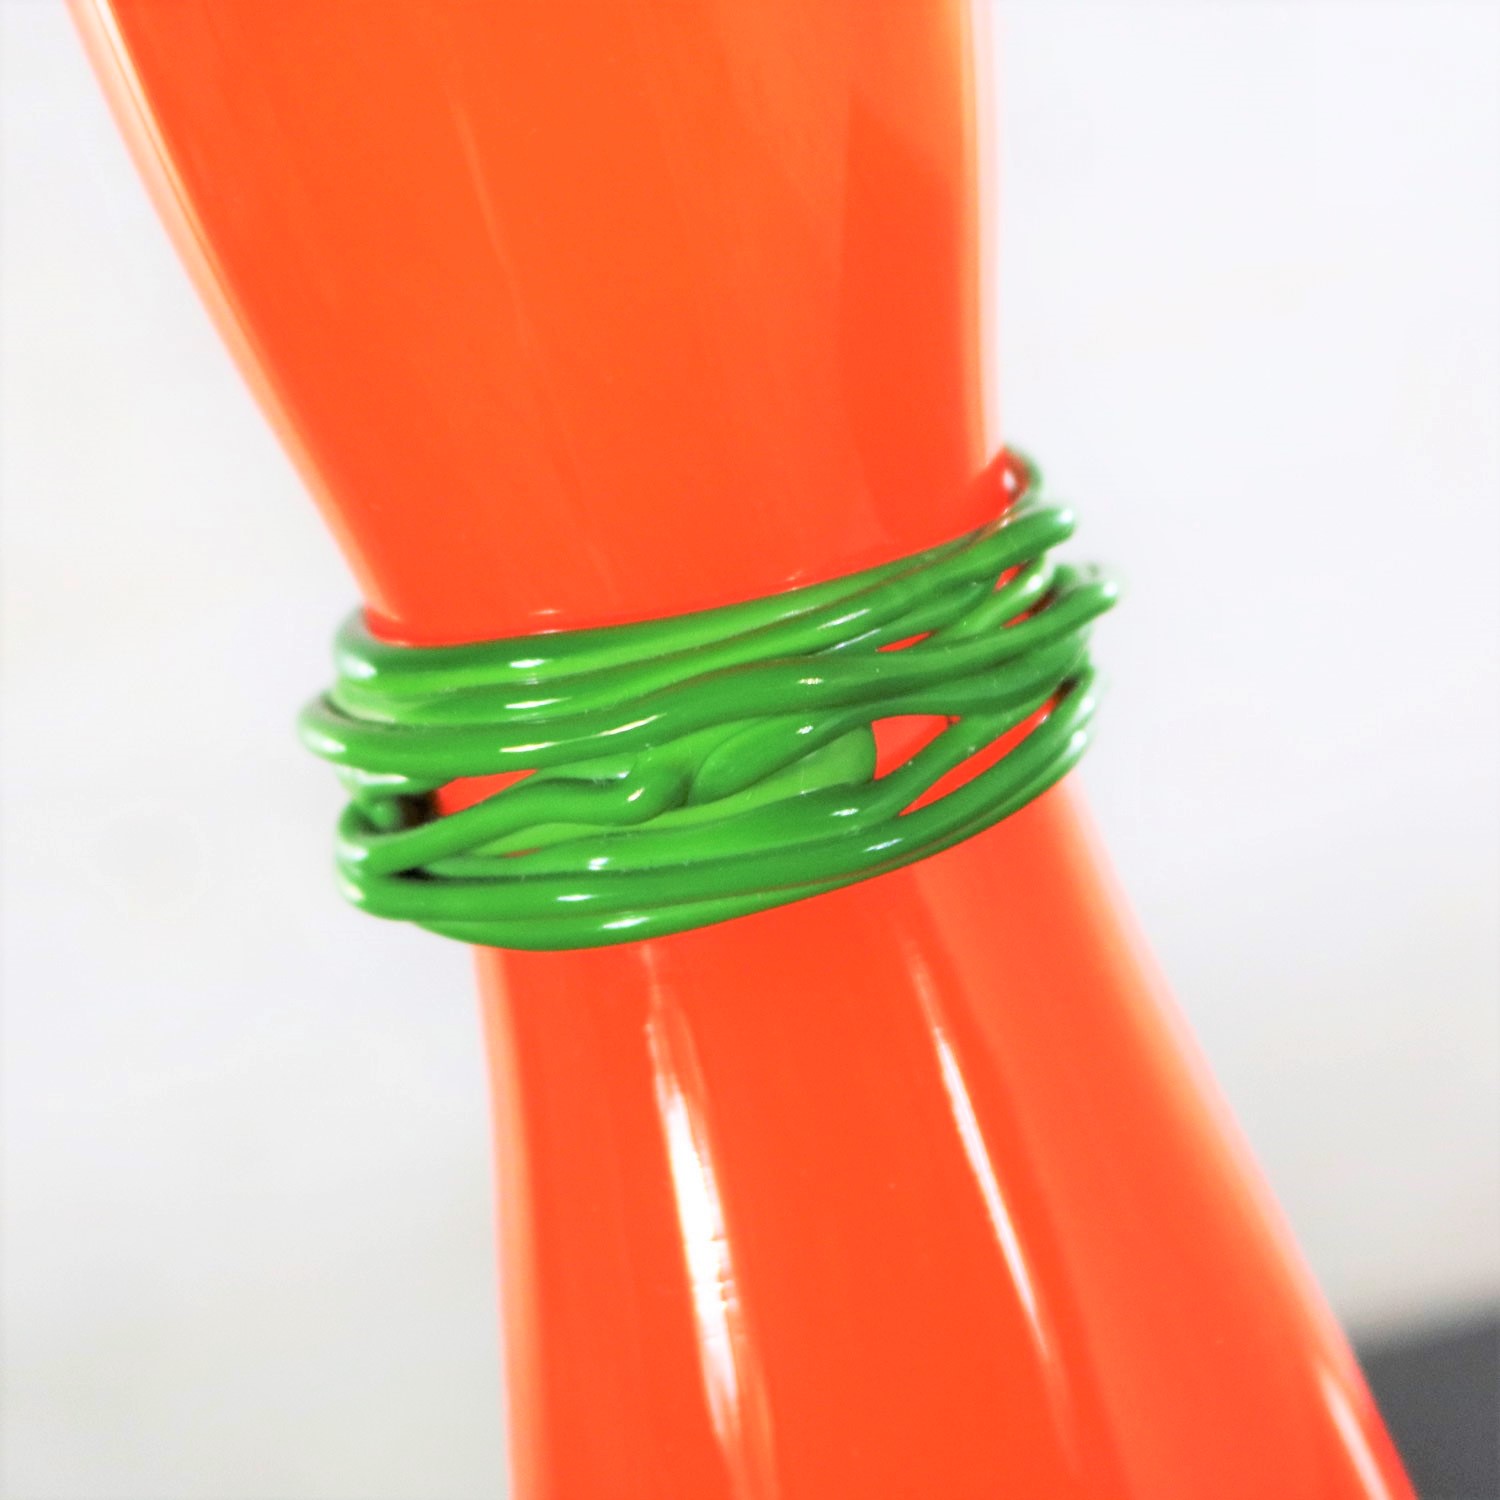 Czech Bohemian Hourglass Glass Vase by Rony Plesl in Orange and Green Signed